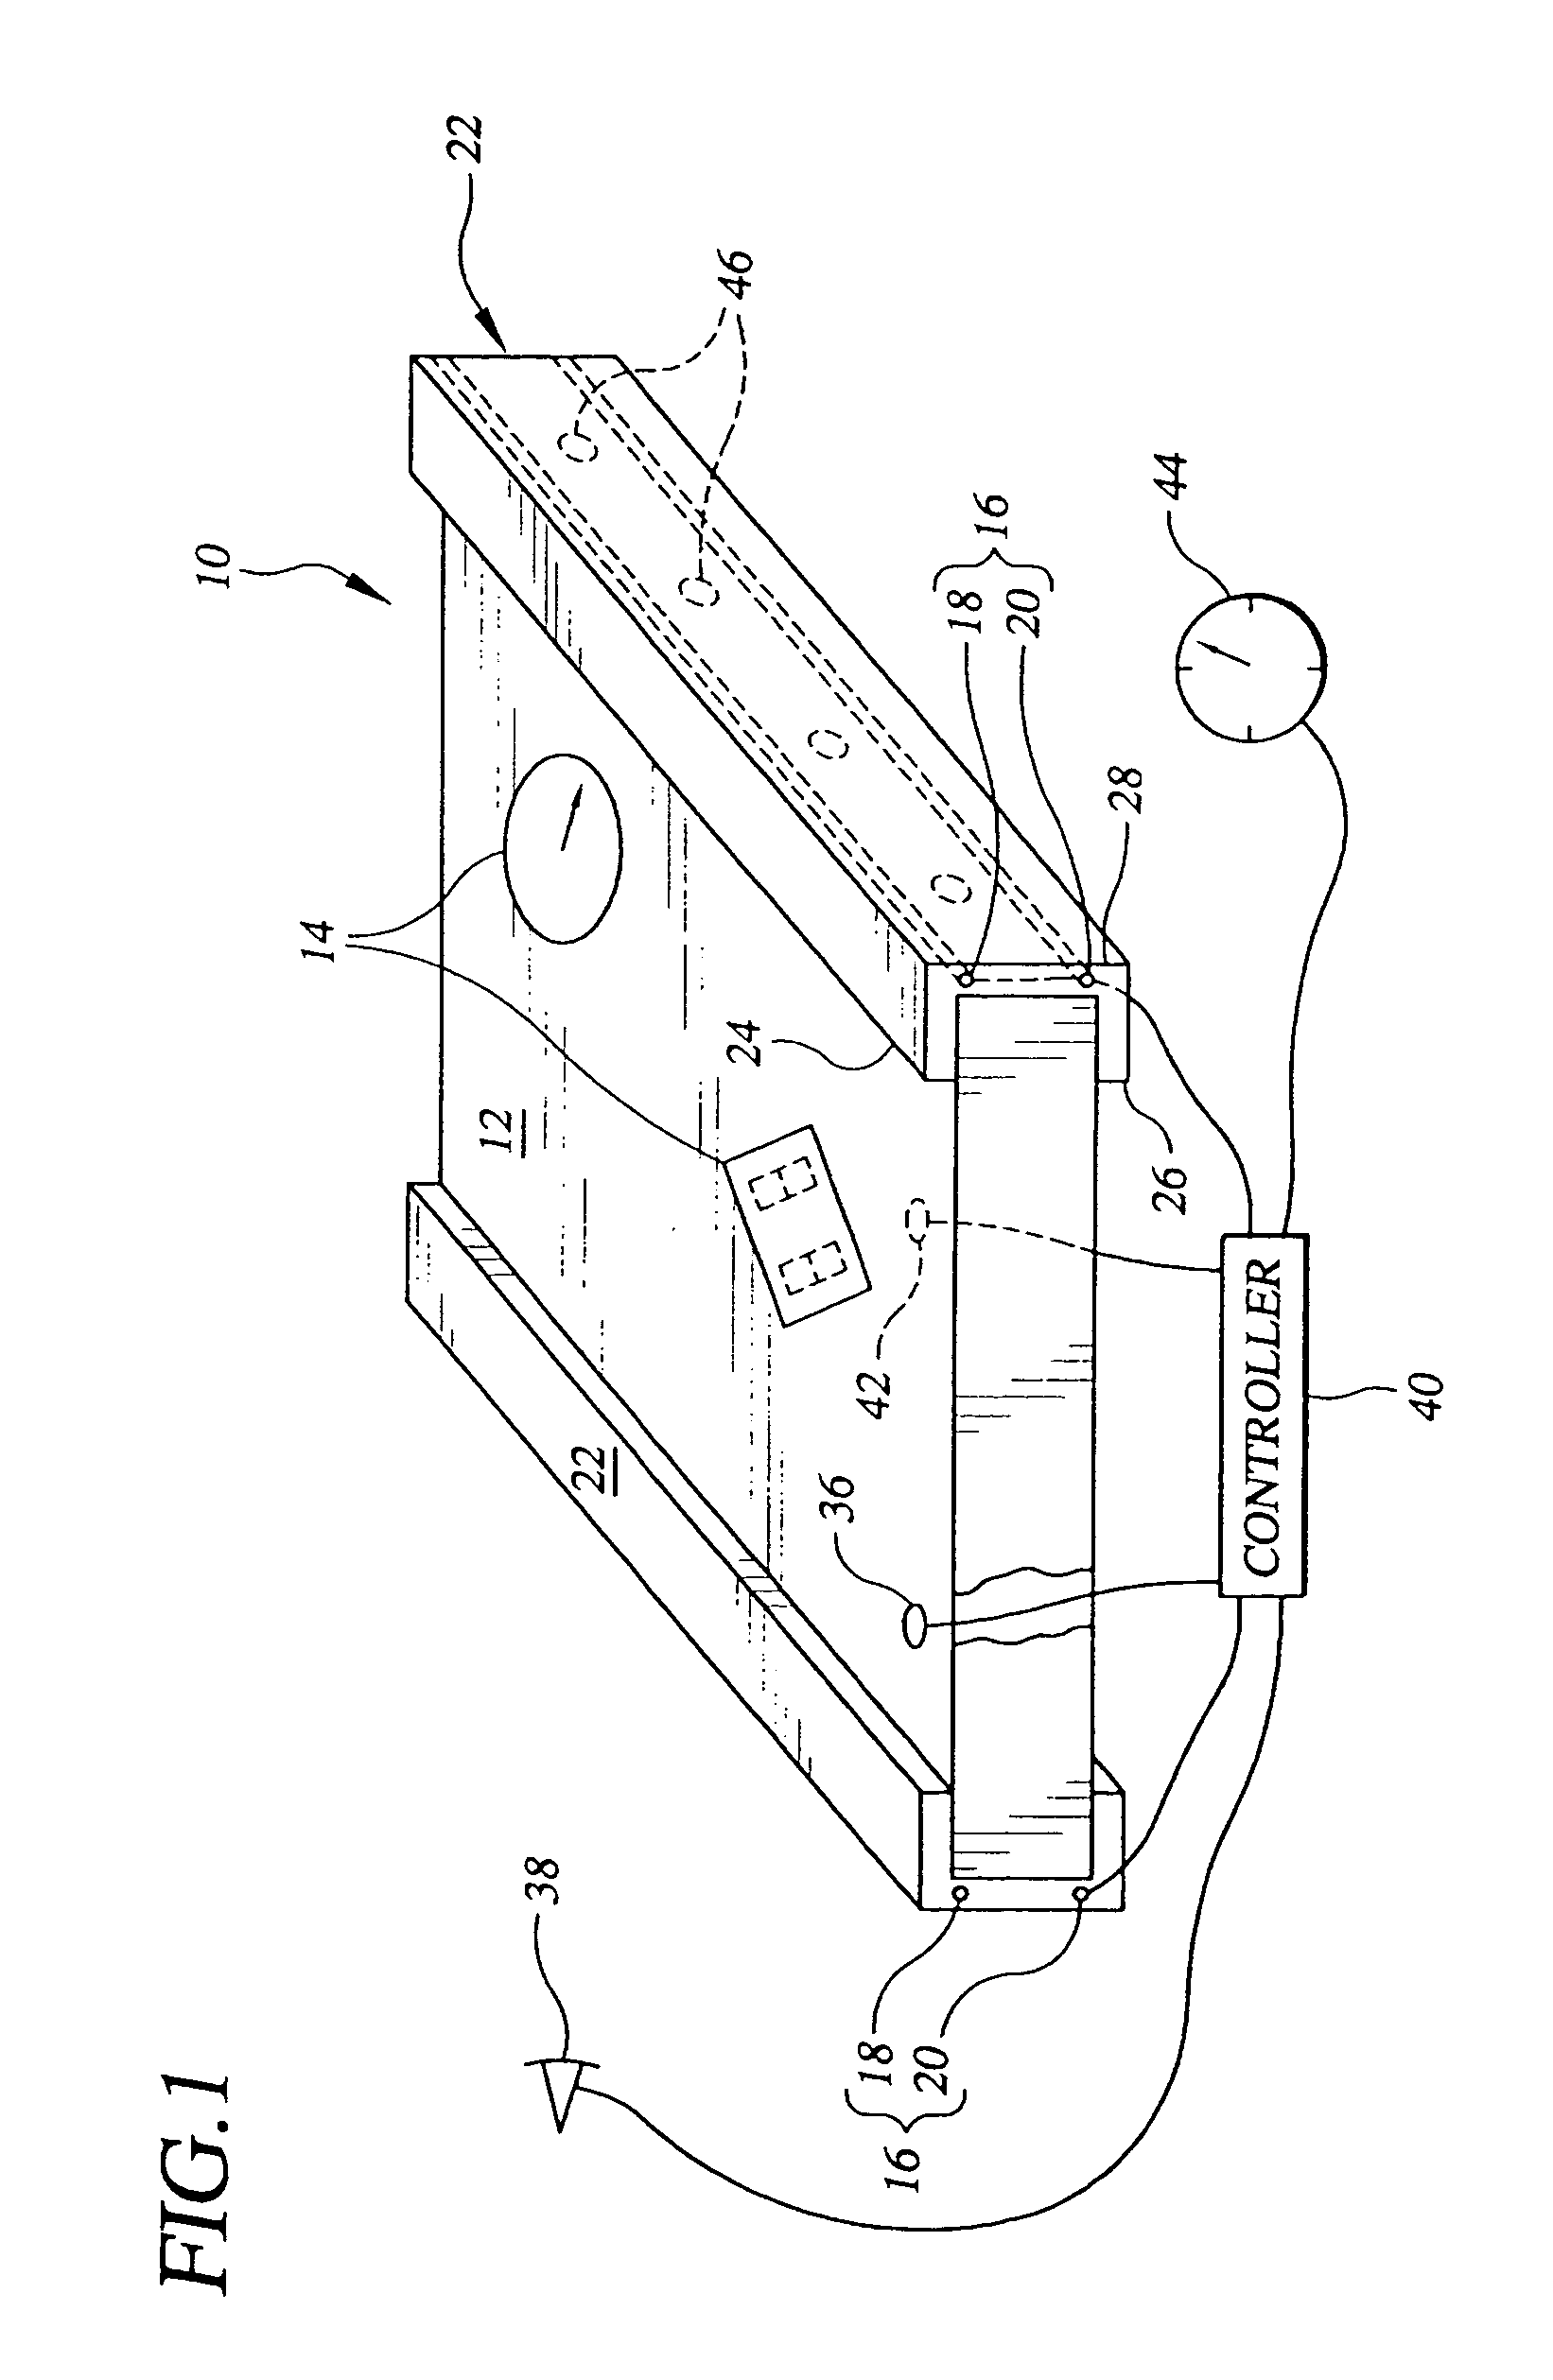 Method and apparatus for illuminating a flat panel display with a variably-adjustable backlight